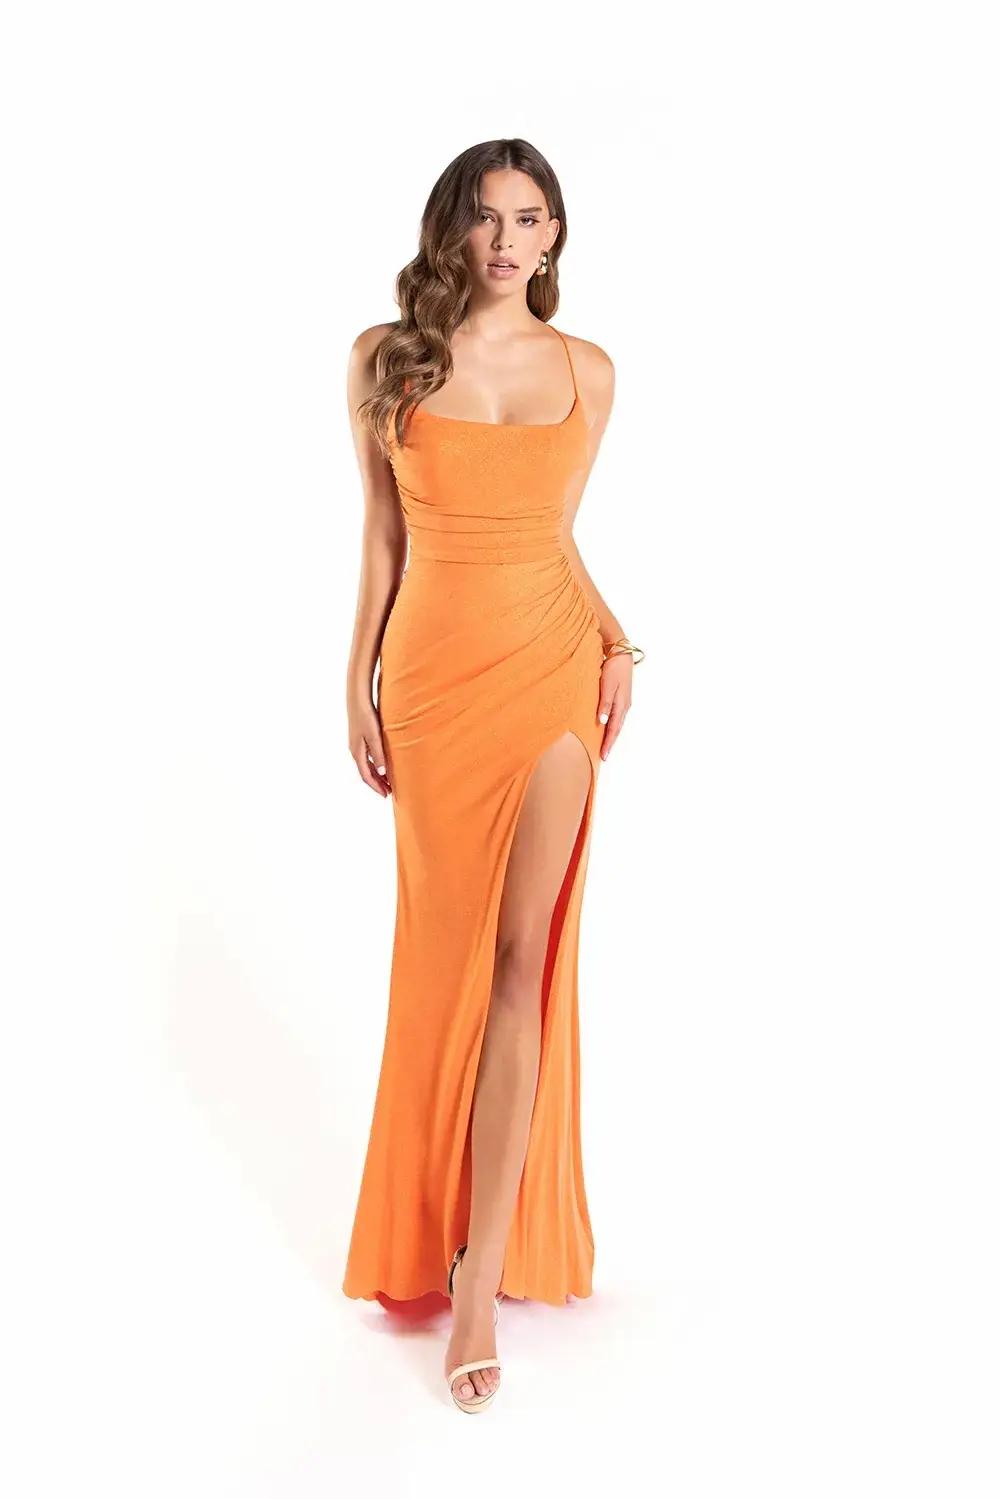 Model wearing a Lucci Lu Spring orange gown